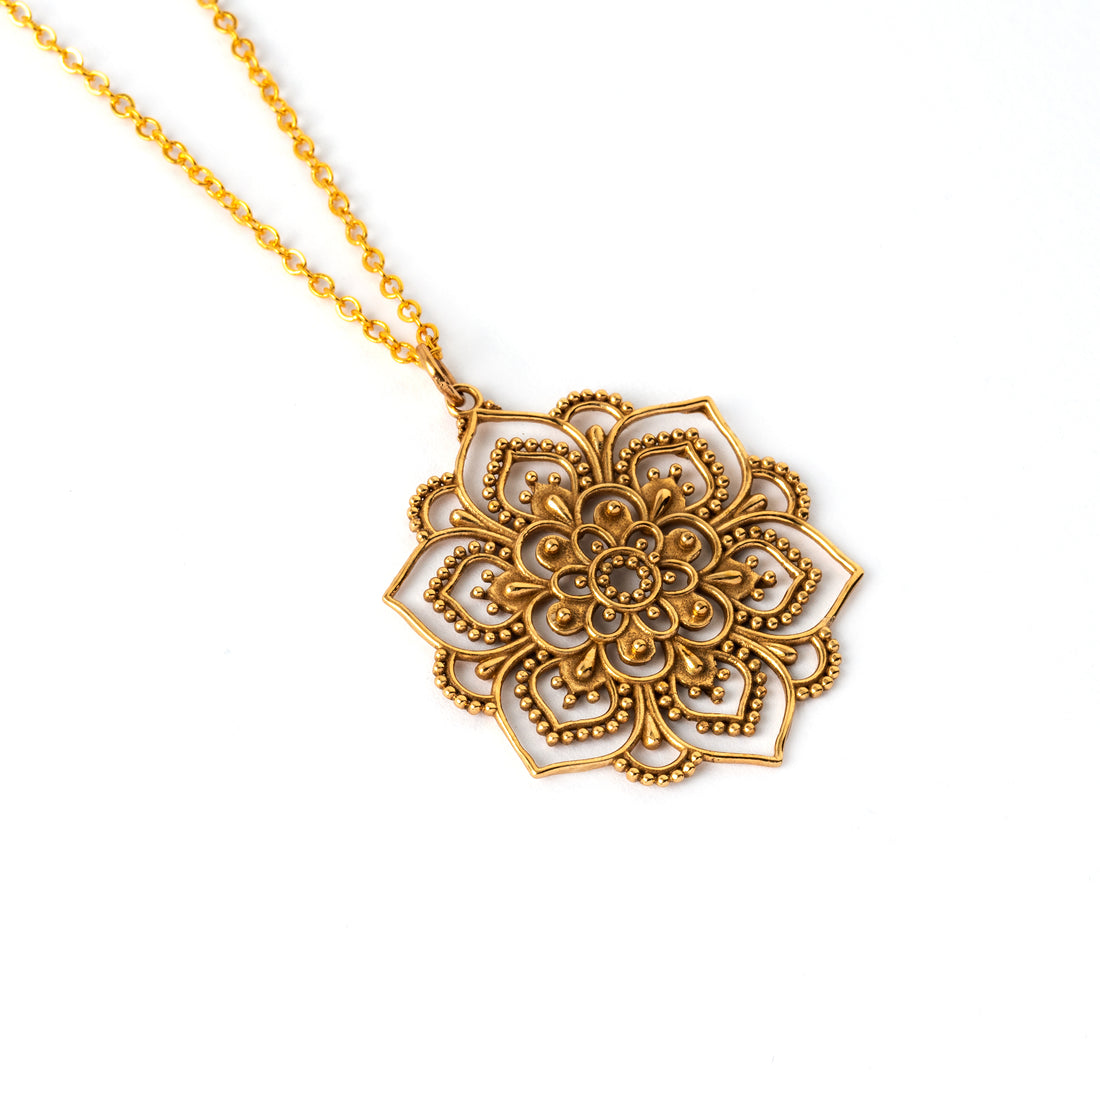 Intricate Lotus Mandala Bronze Necklace right side view